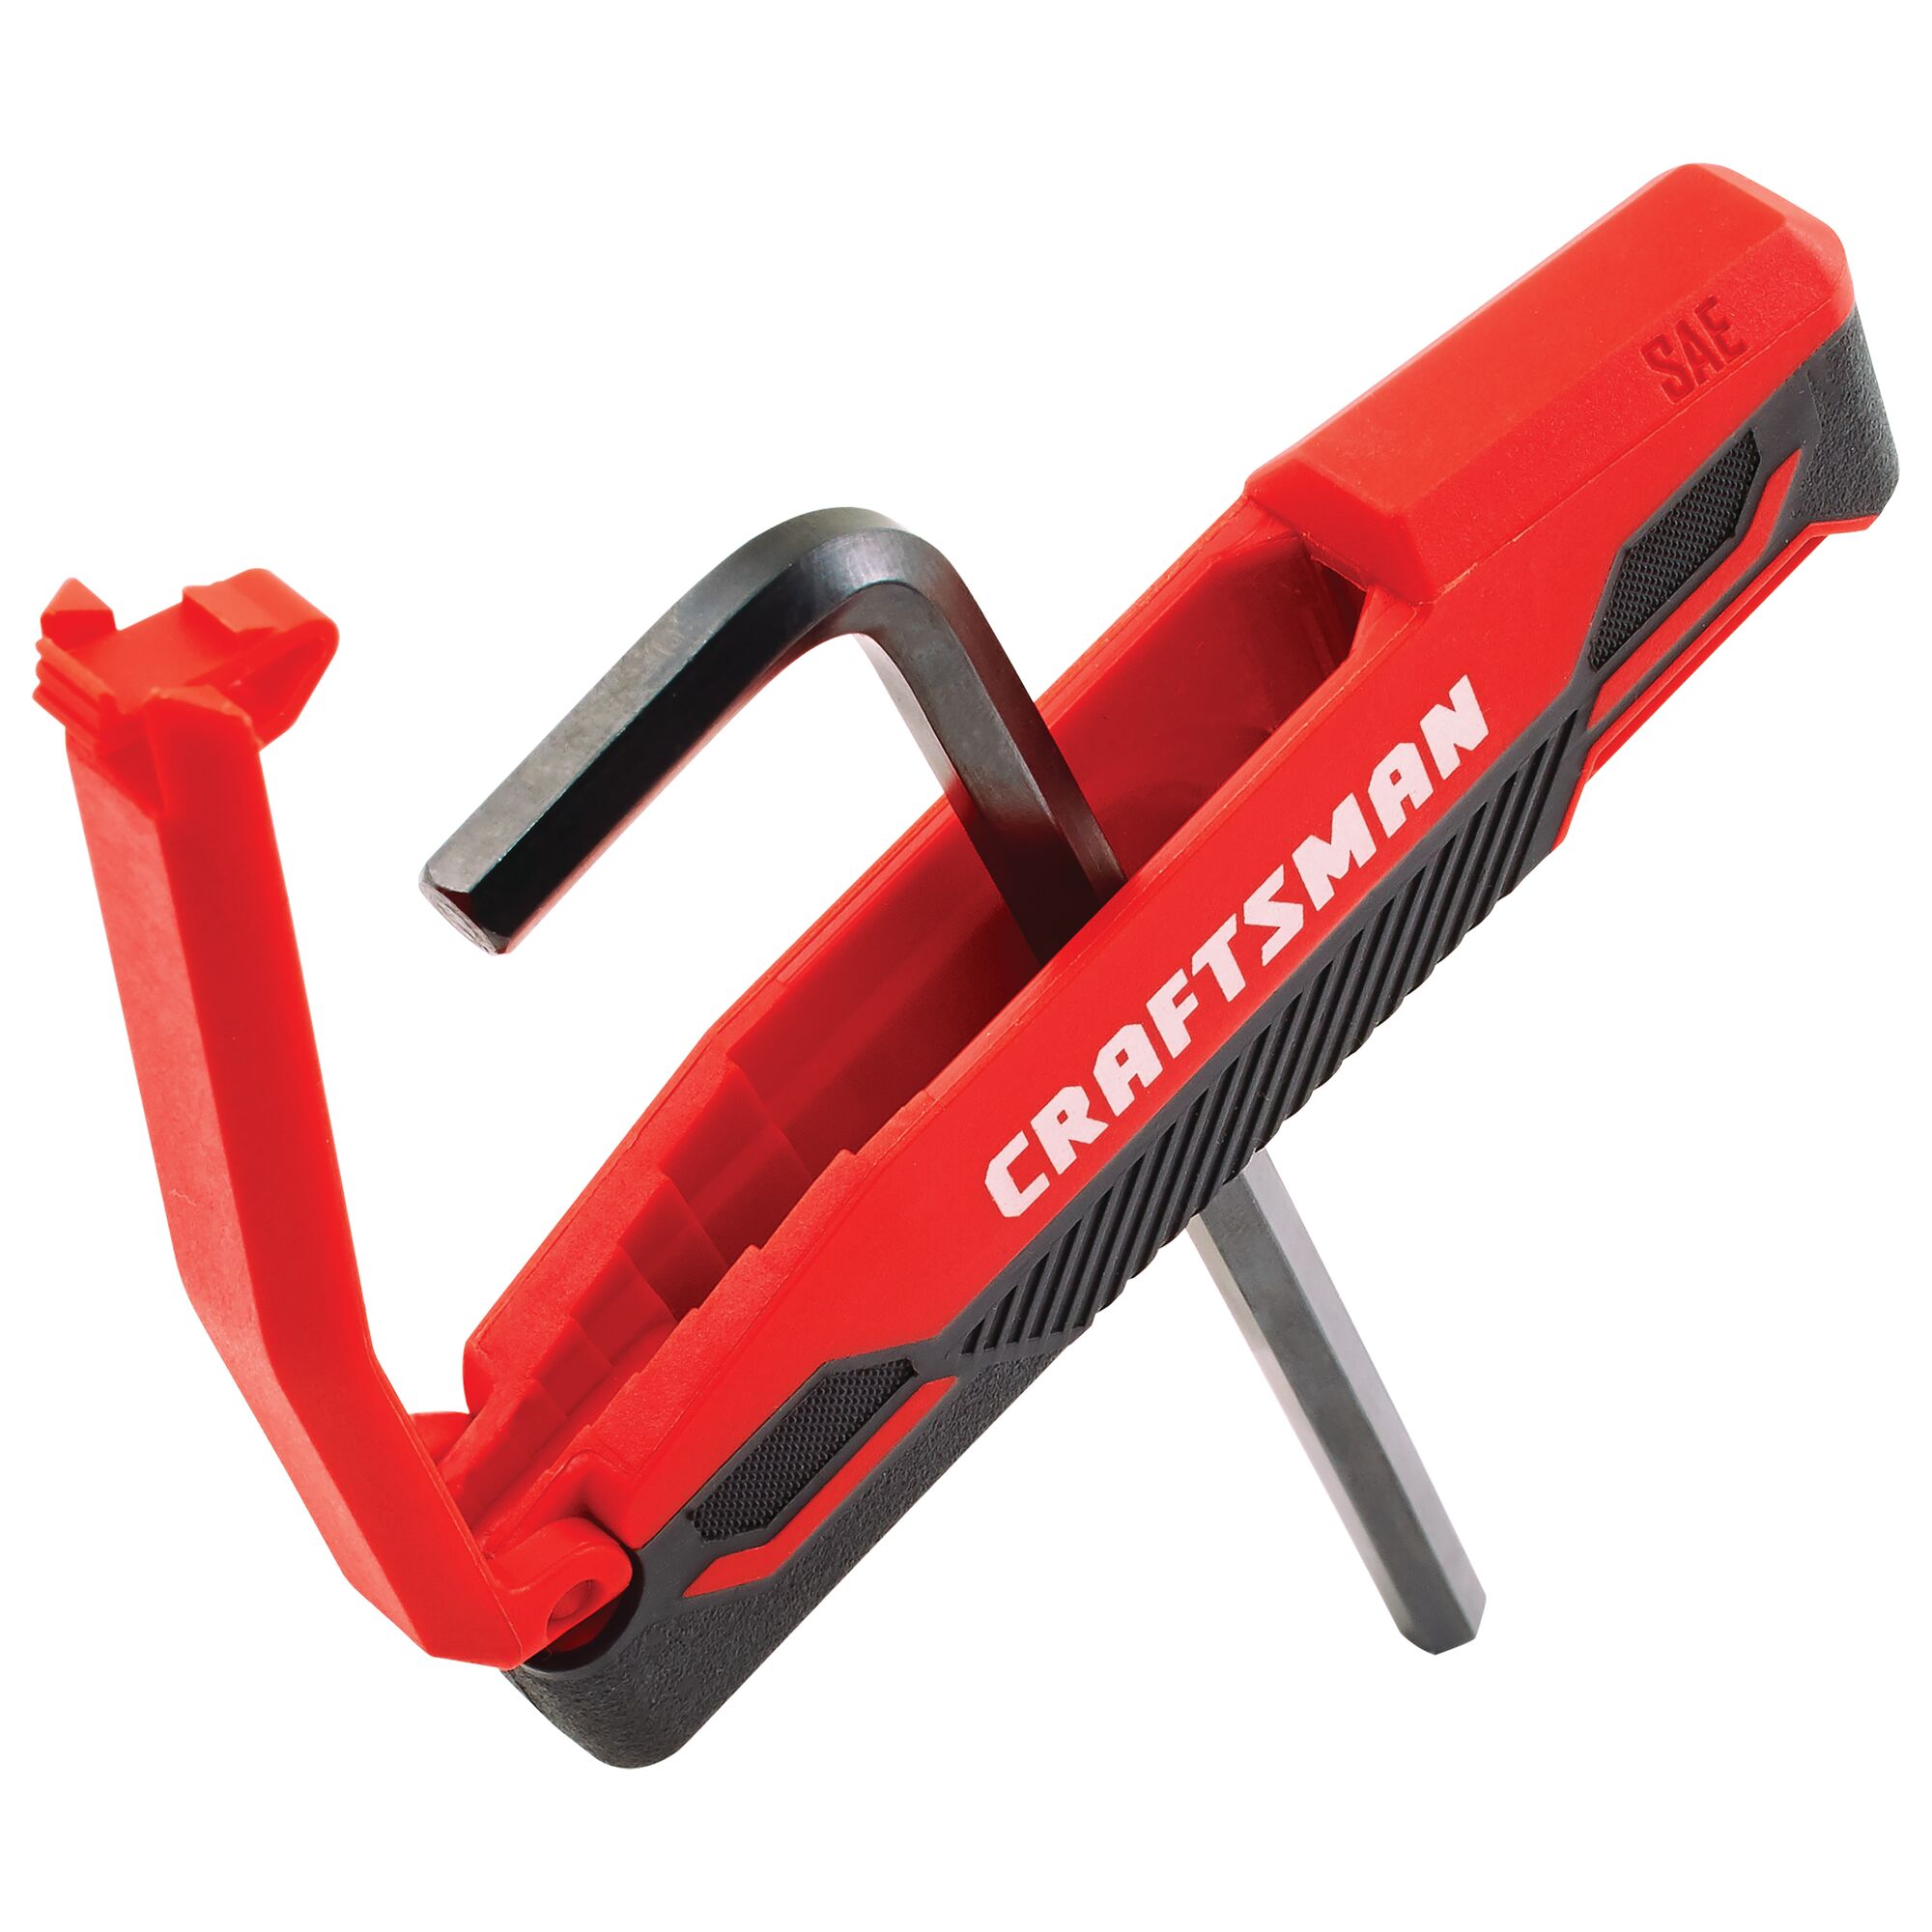 View of CRAFTSMAN Screwdrivers: Hex Keys highlighting product features